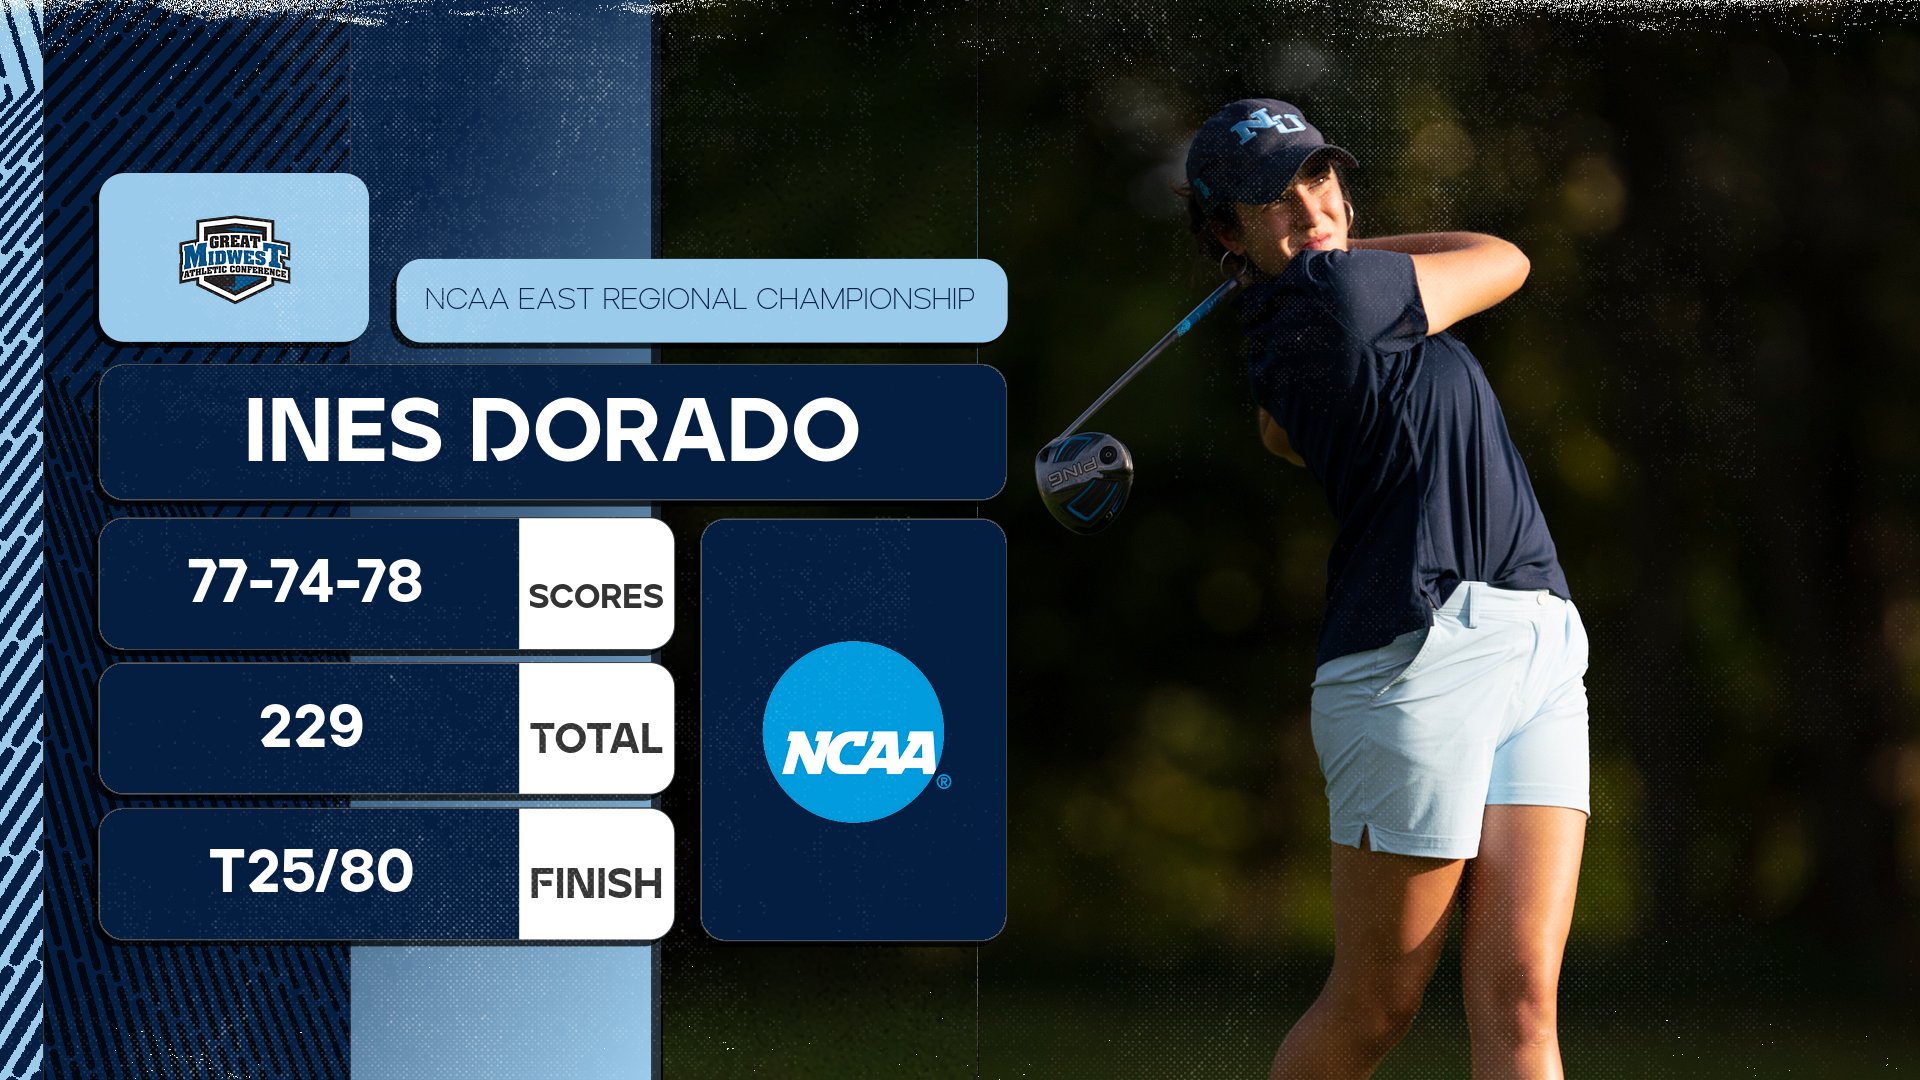 Ines Dorado Concludes Career At The NCAA East Regional Championship